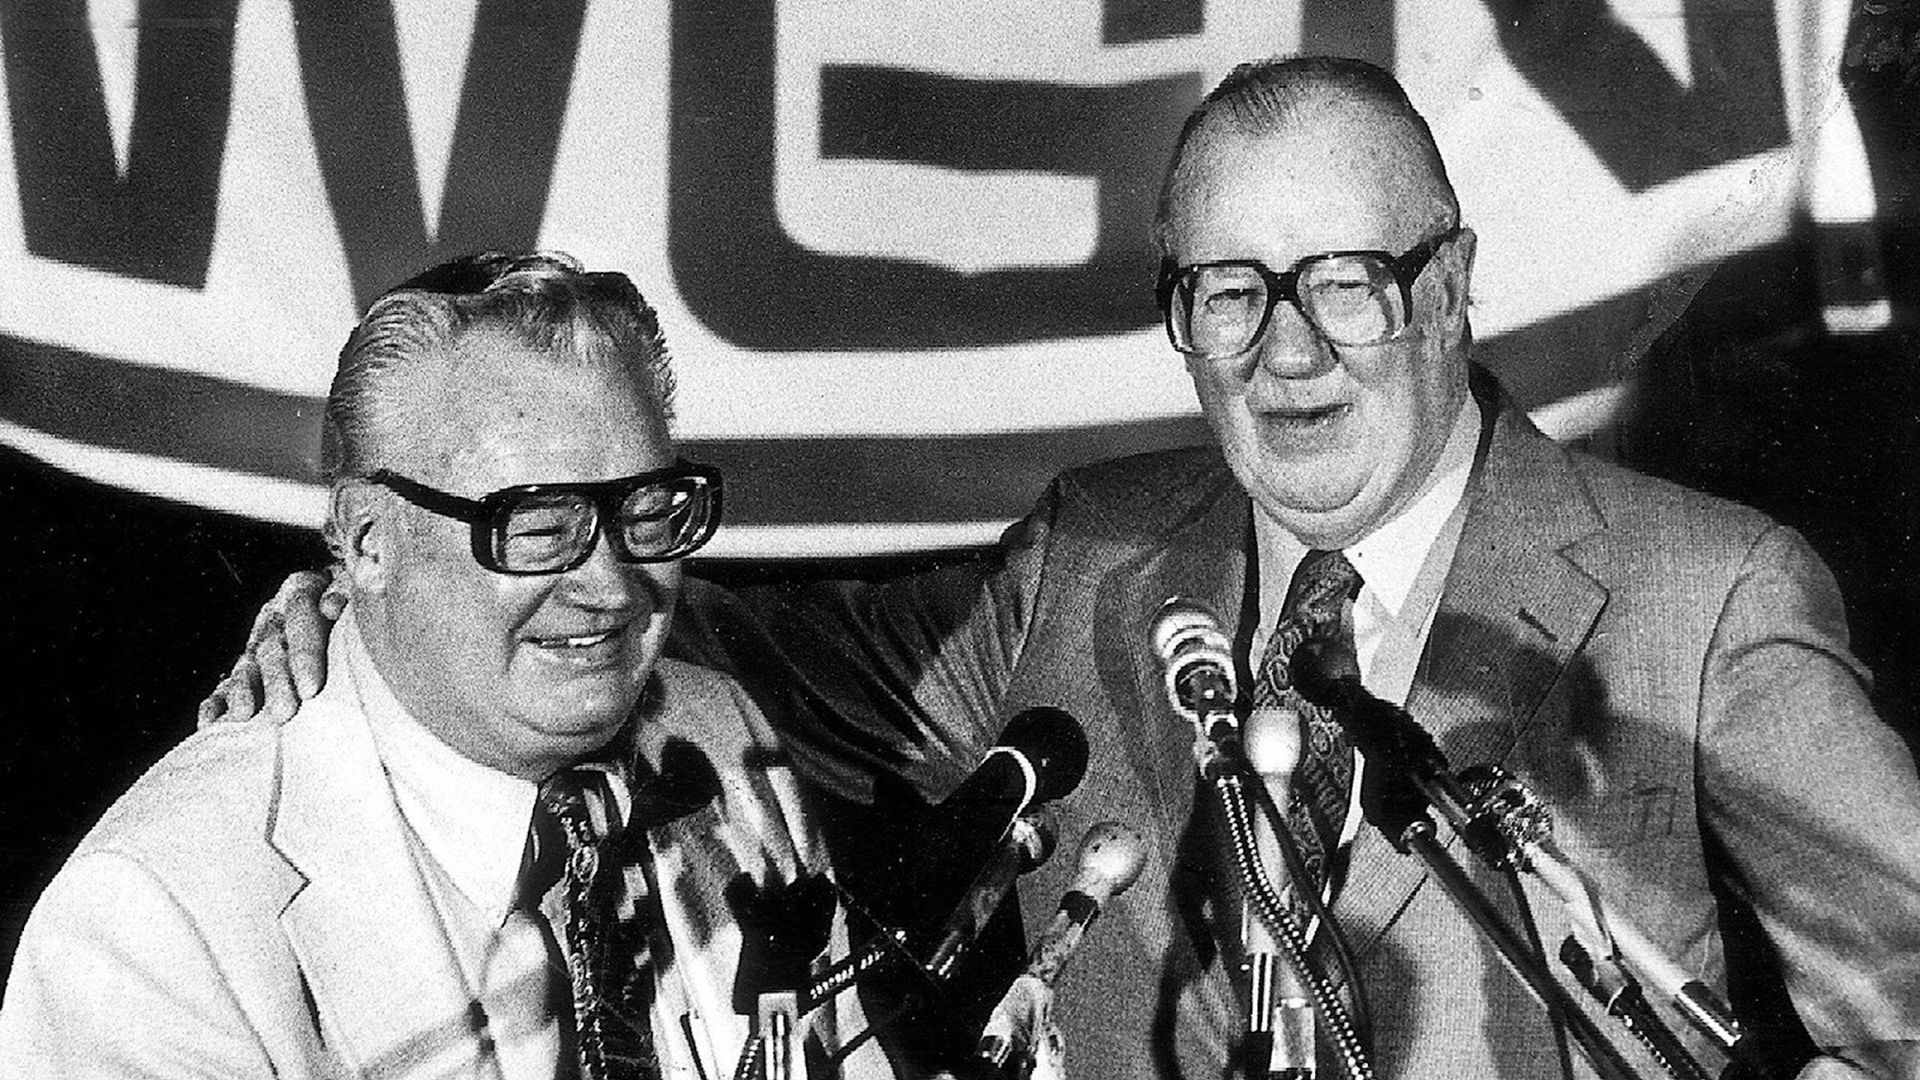 Jack Brickhouse introduces Harry Caray at a press conference in 1981. 